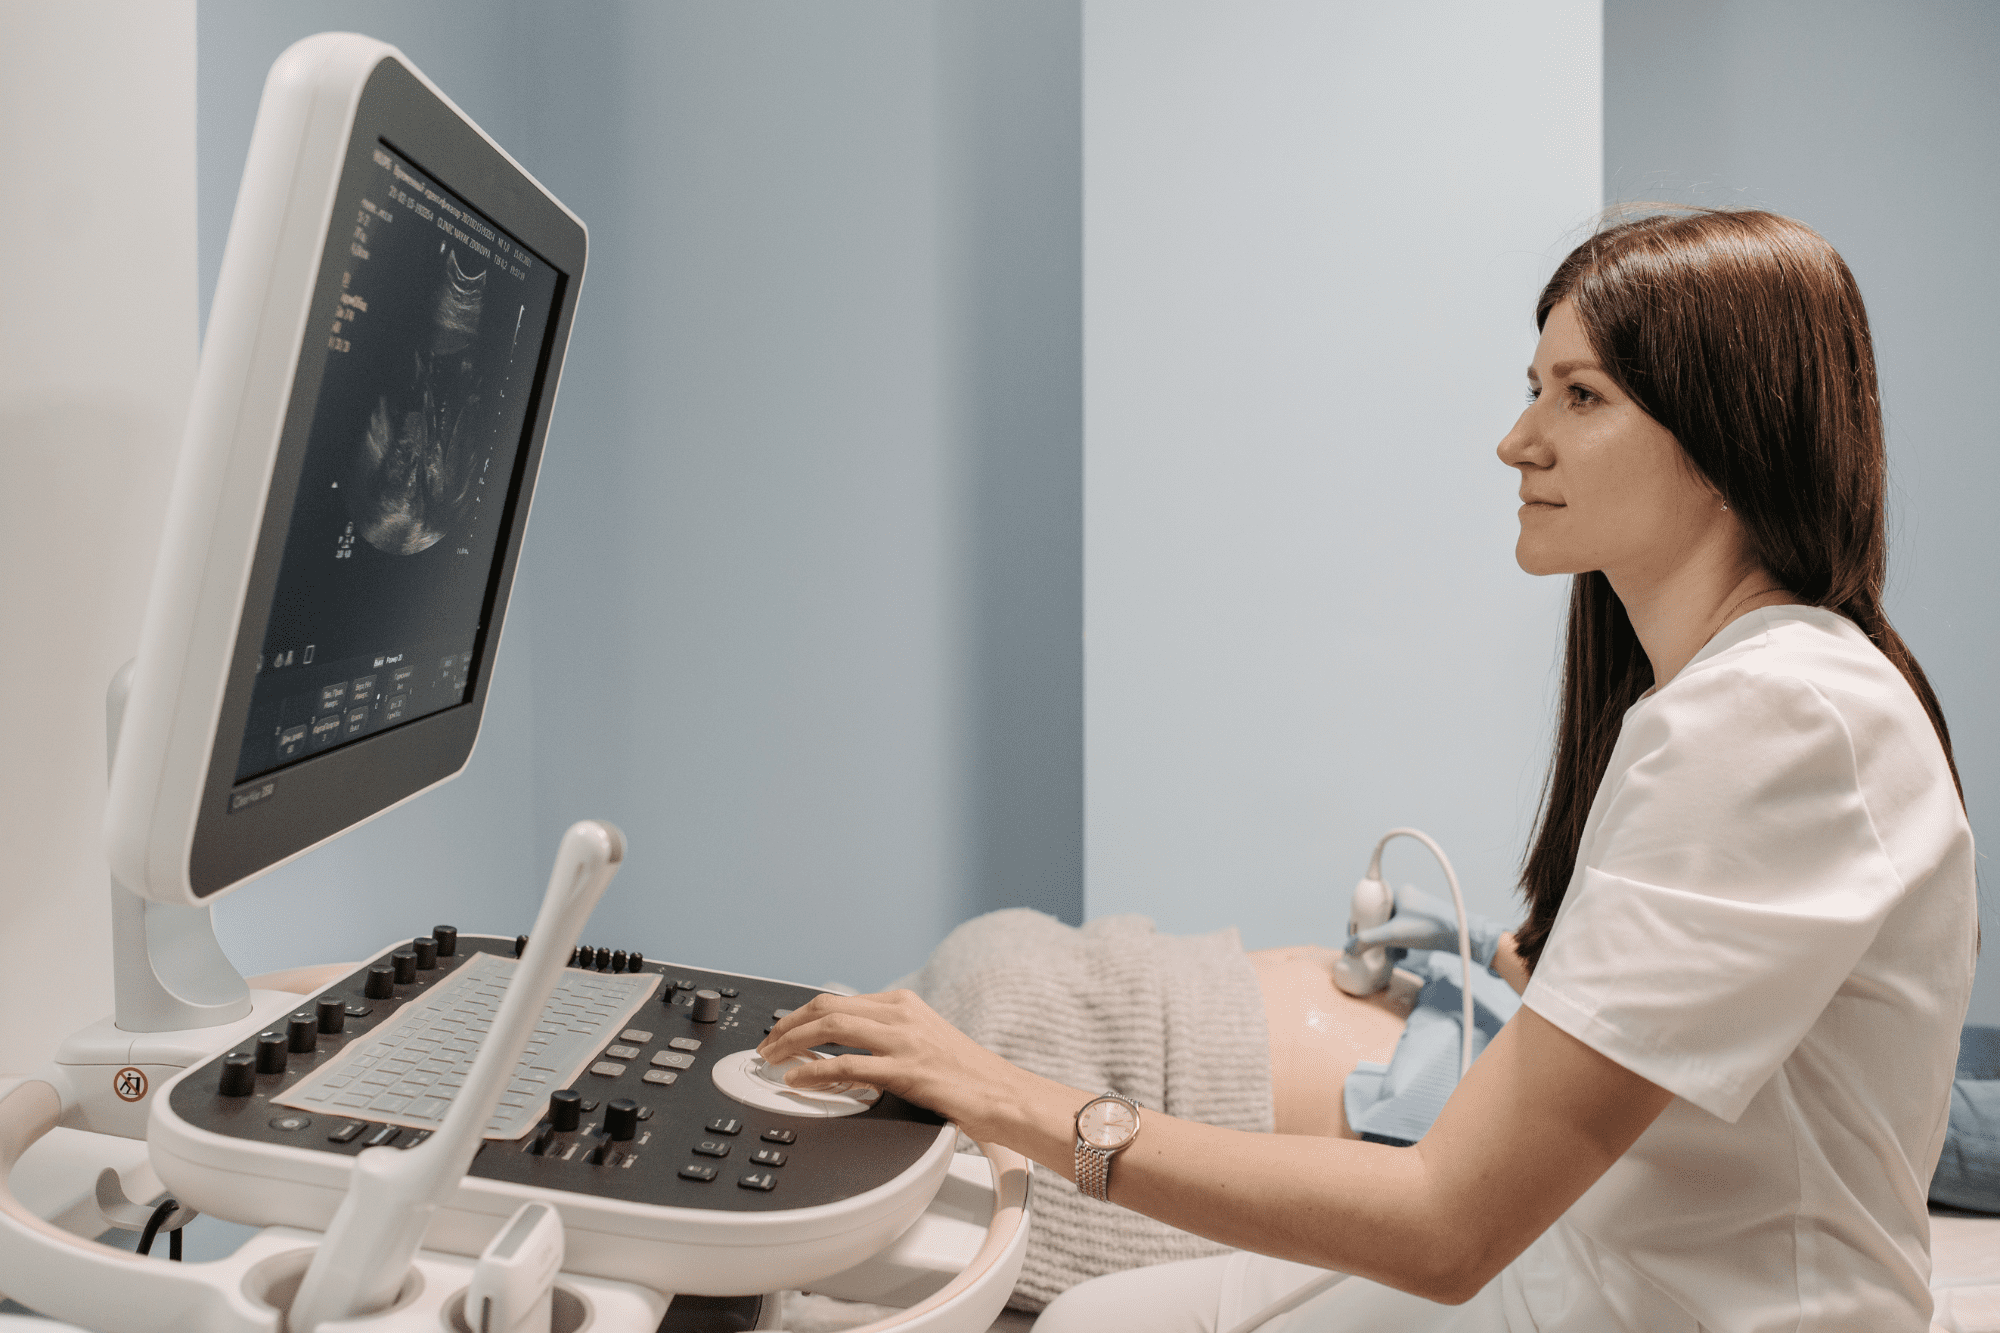 Ultrasounds are expensive